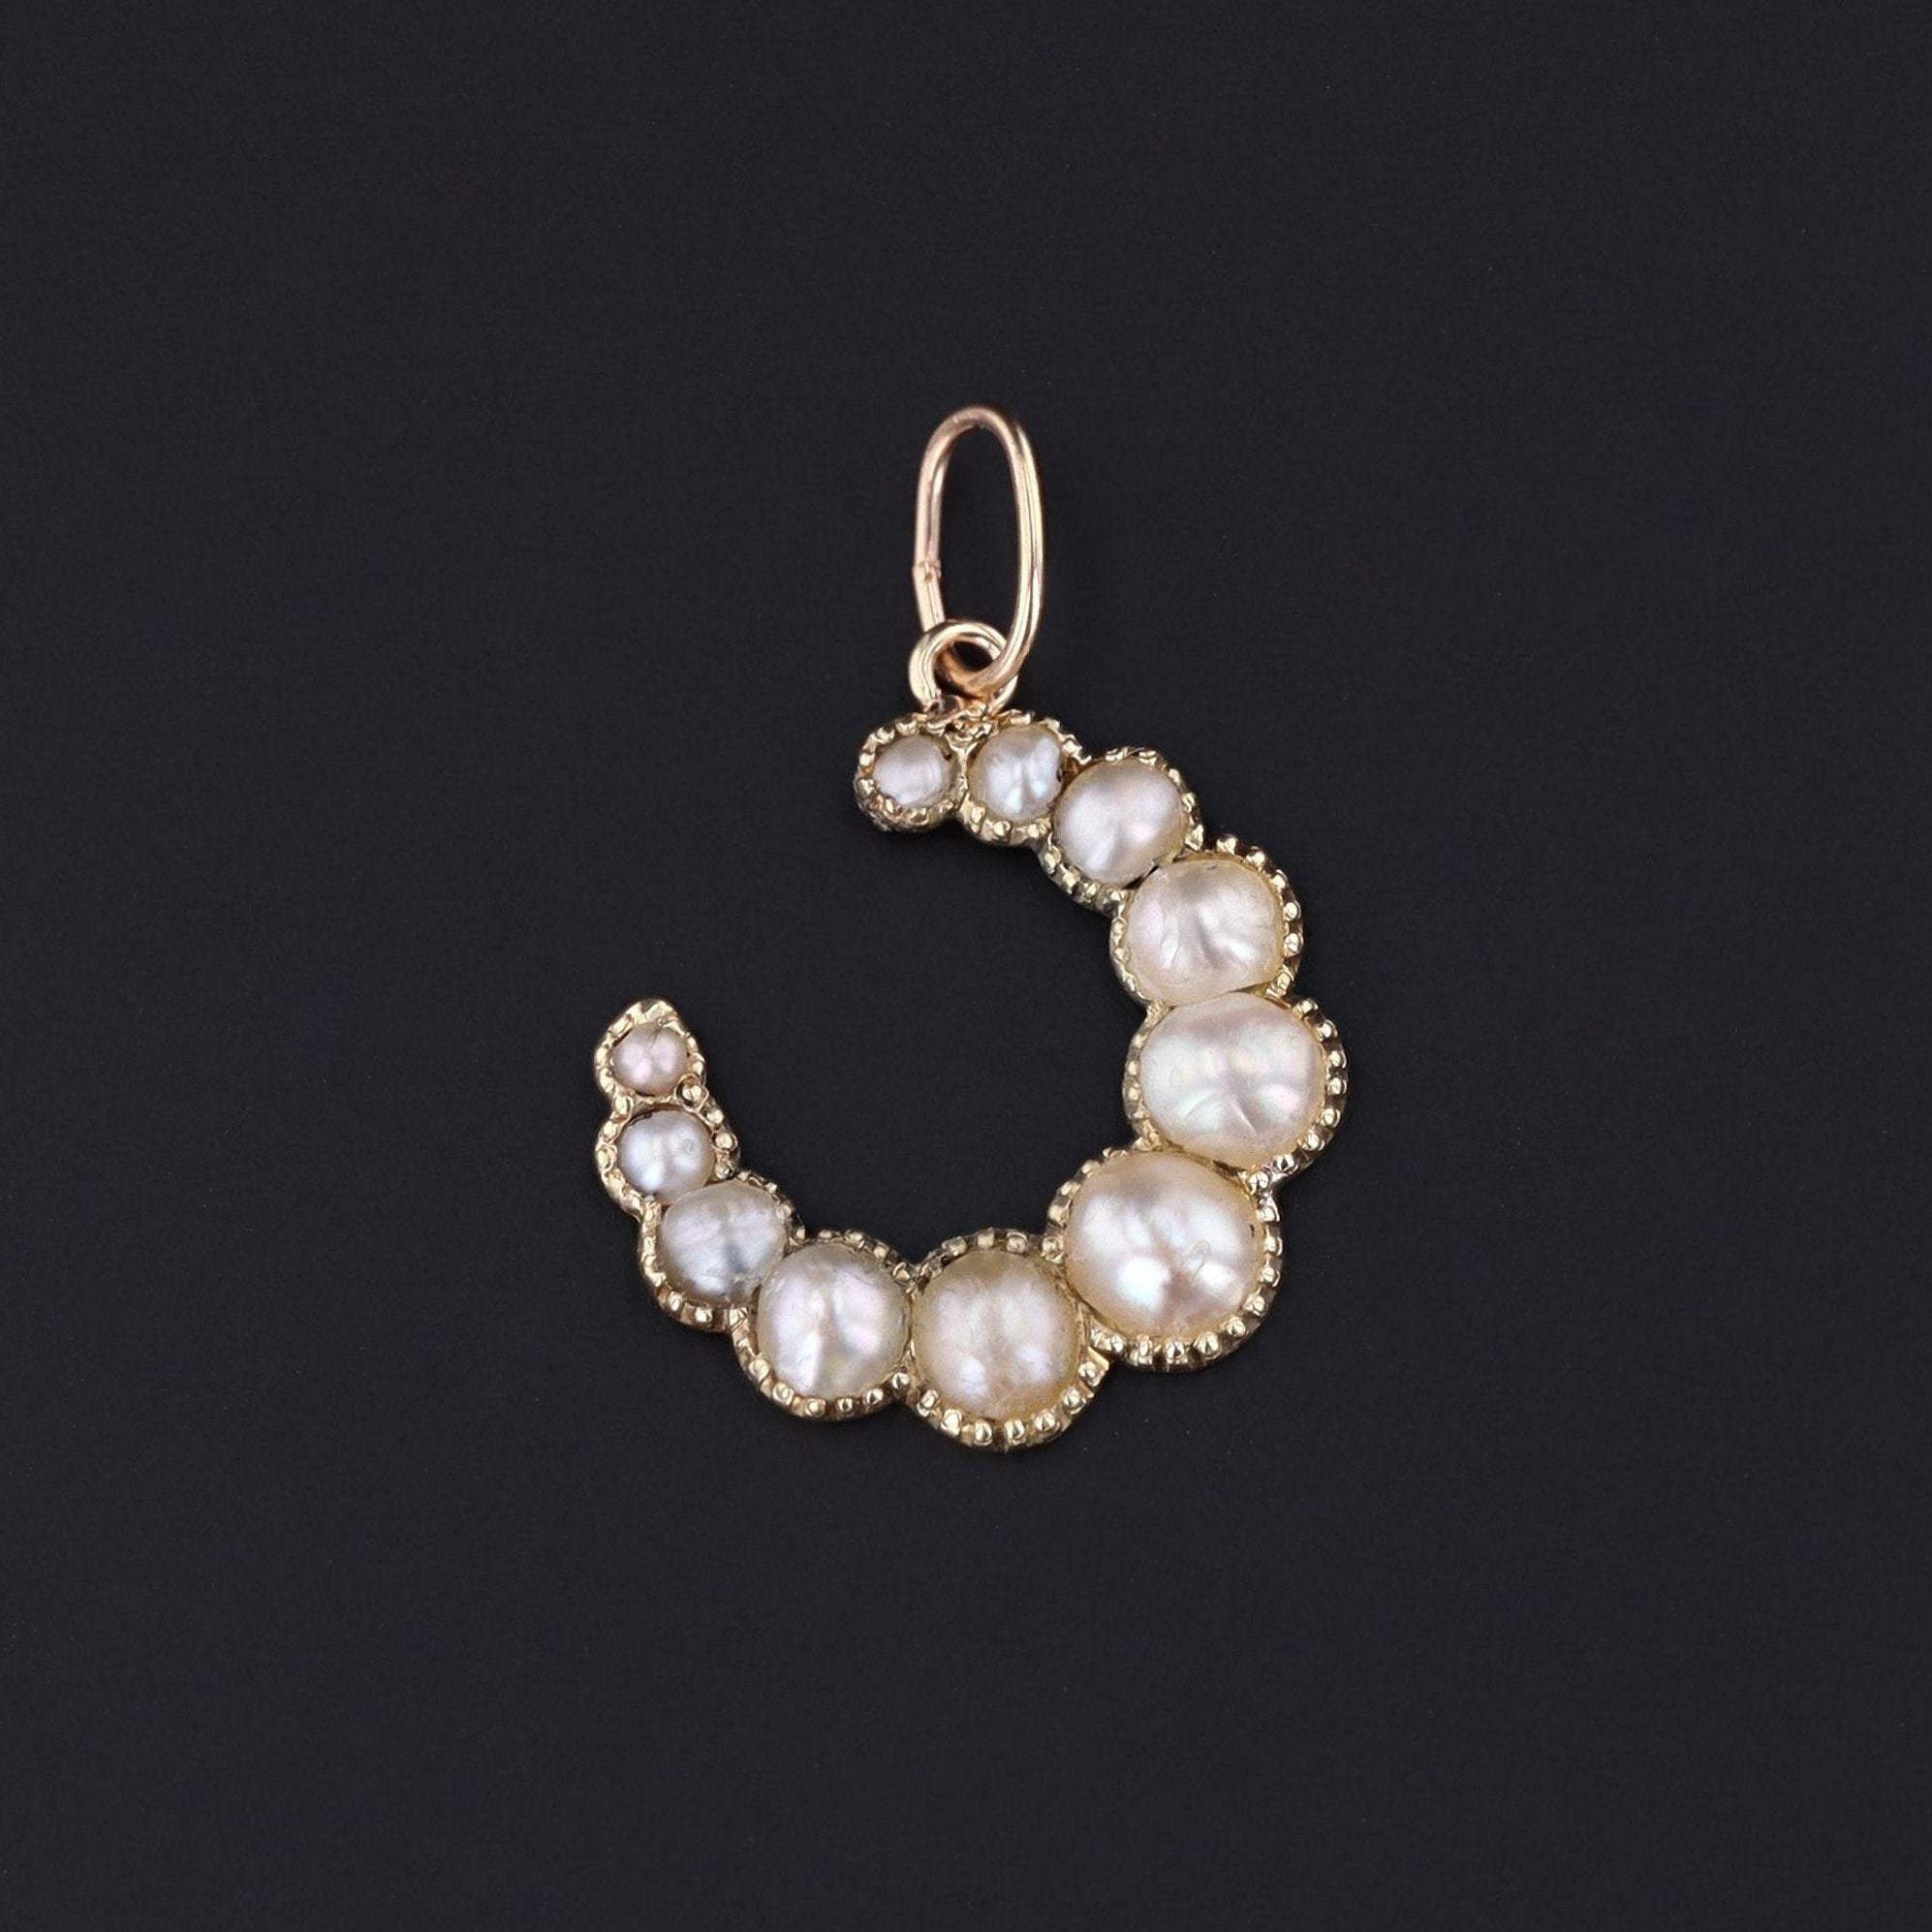 Crescent Moon Charm | Antique Crescent Charm | 14k Gold and Pearl Charm | Pin Conversion | 14k Gold Charm